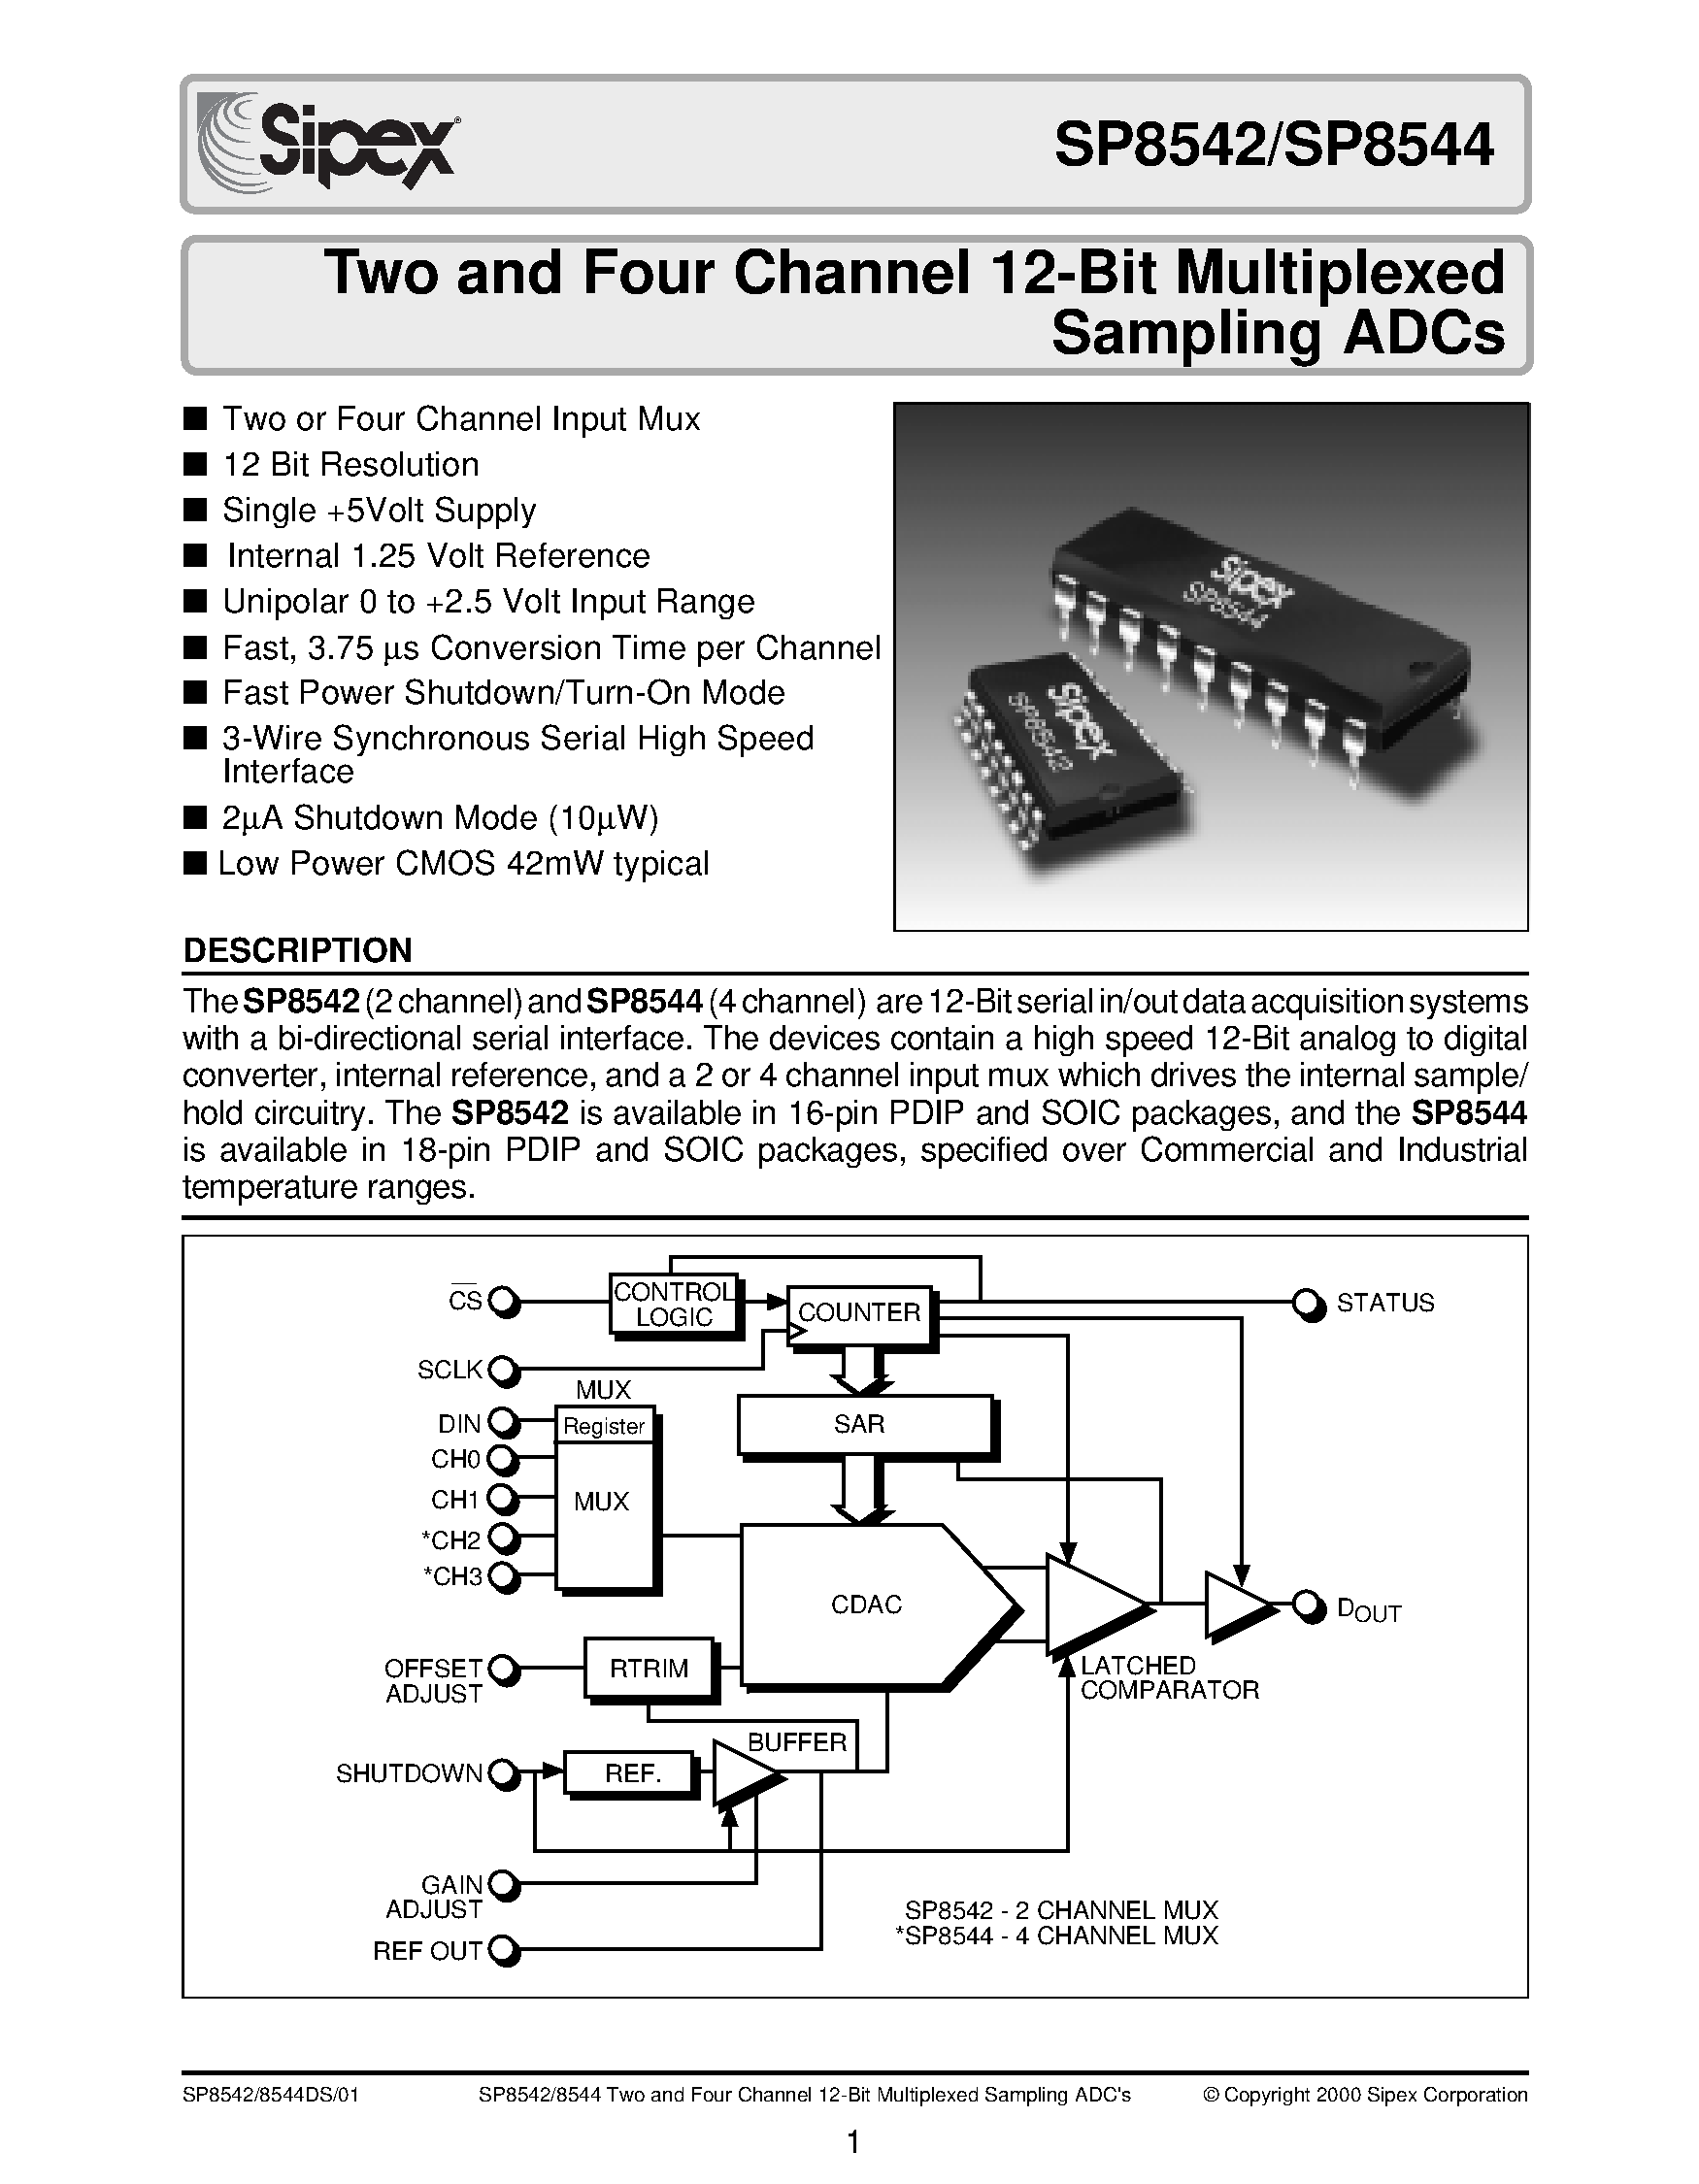 Datasheet SP8544JS - Two and Four Channel 12-Bit Multiplexed Sampling ADCs page 1